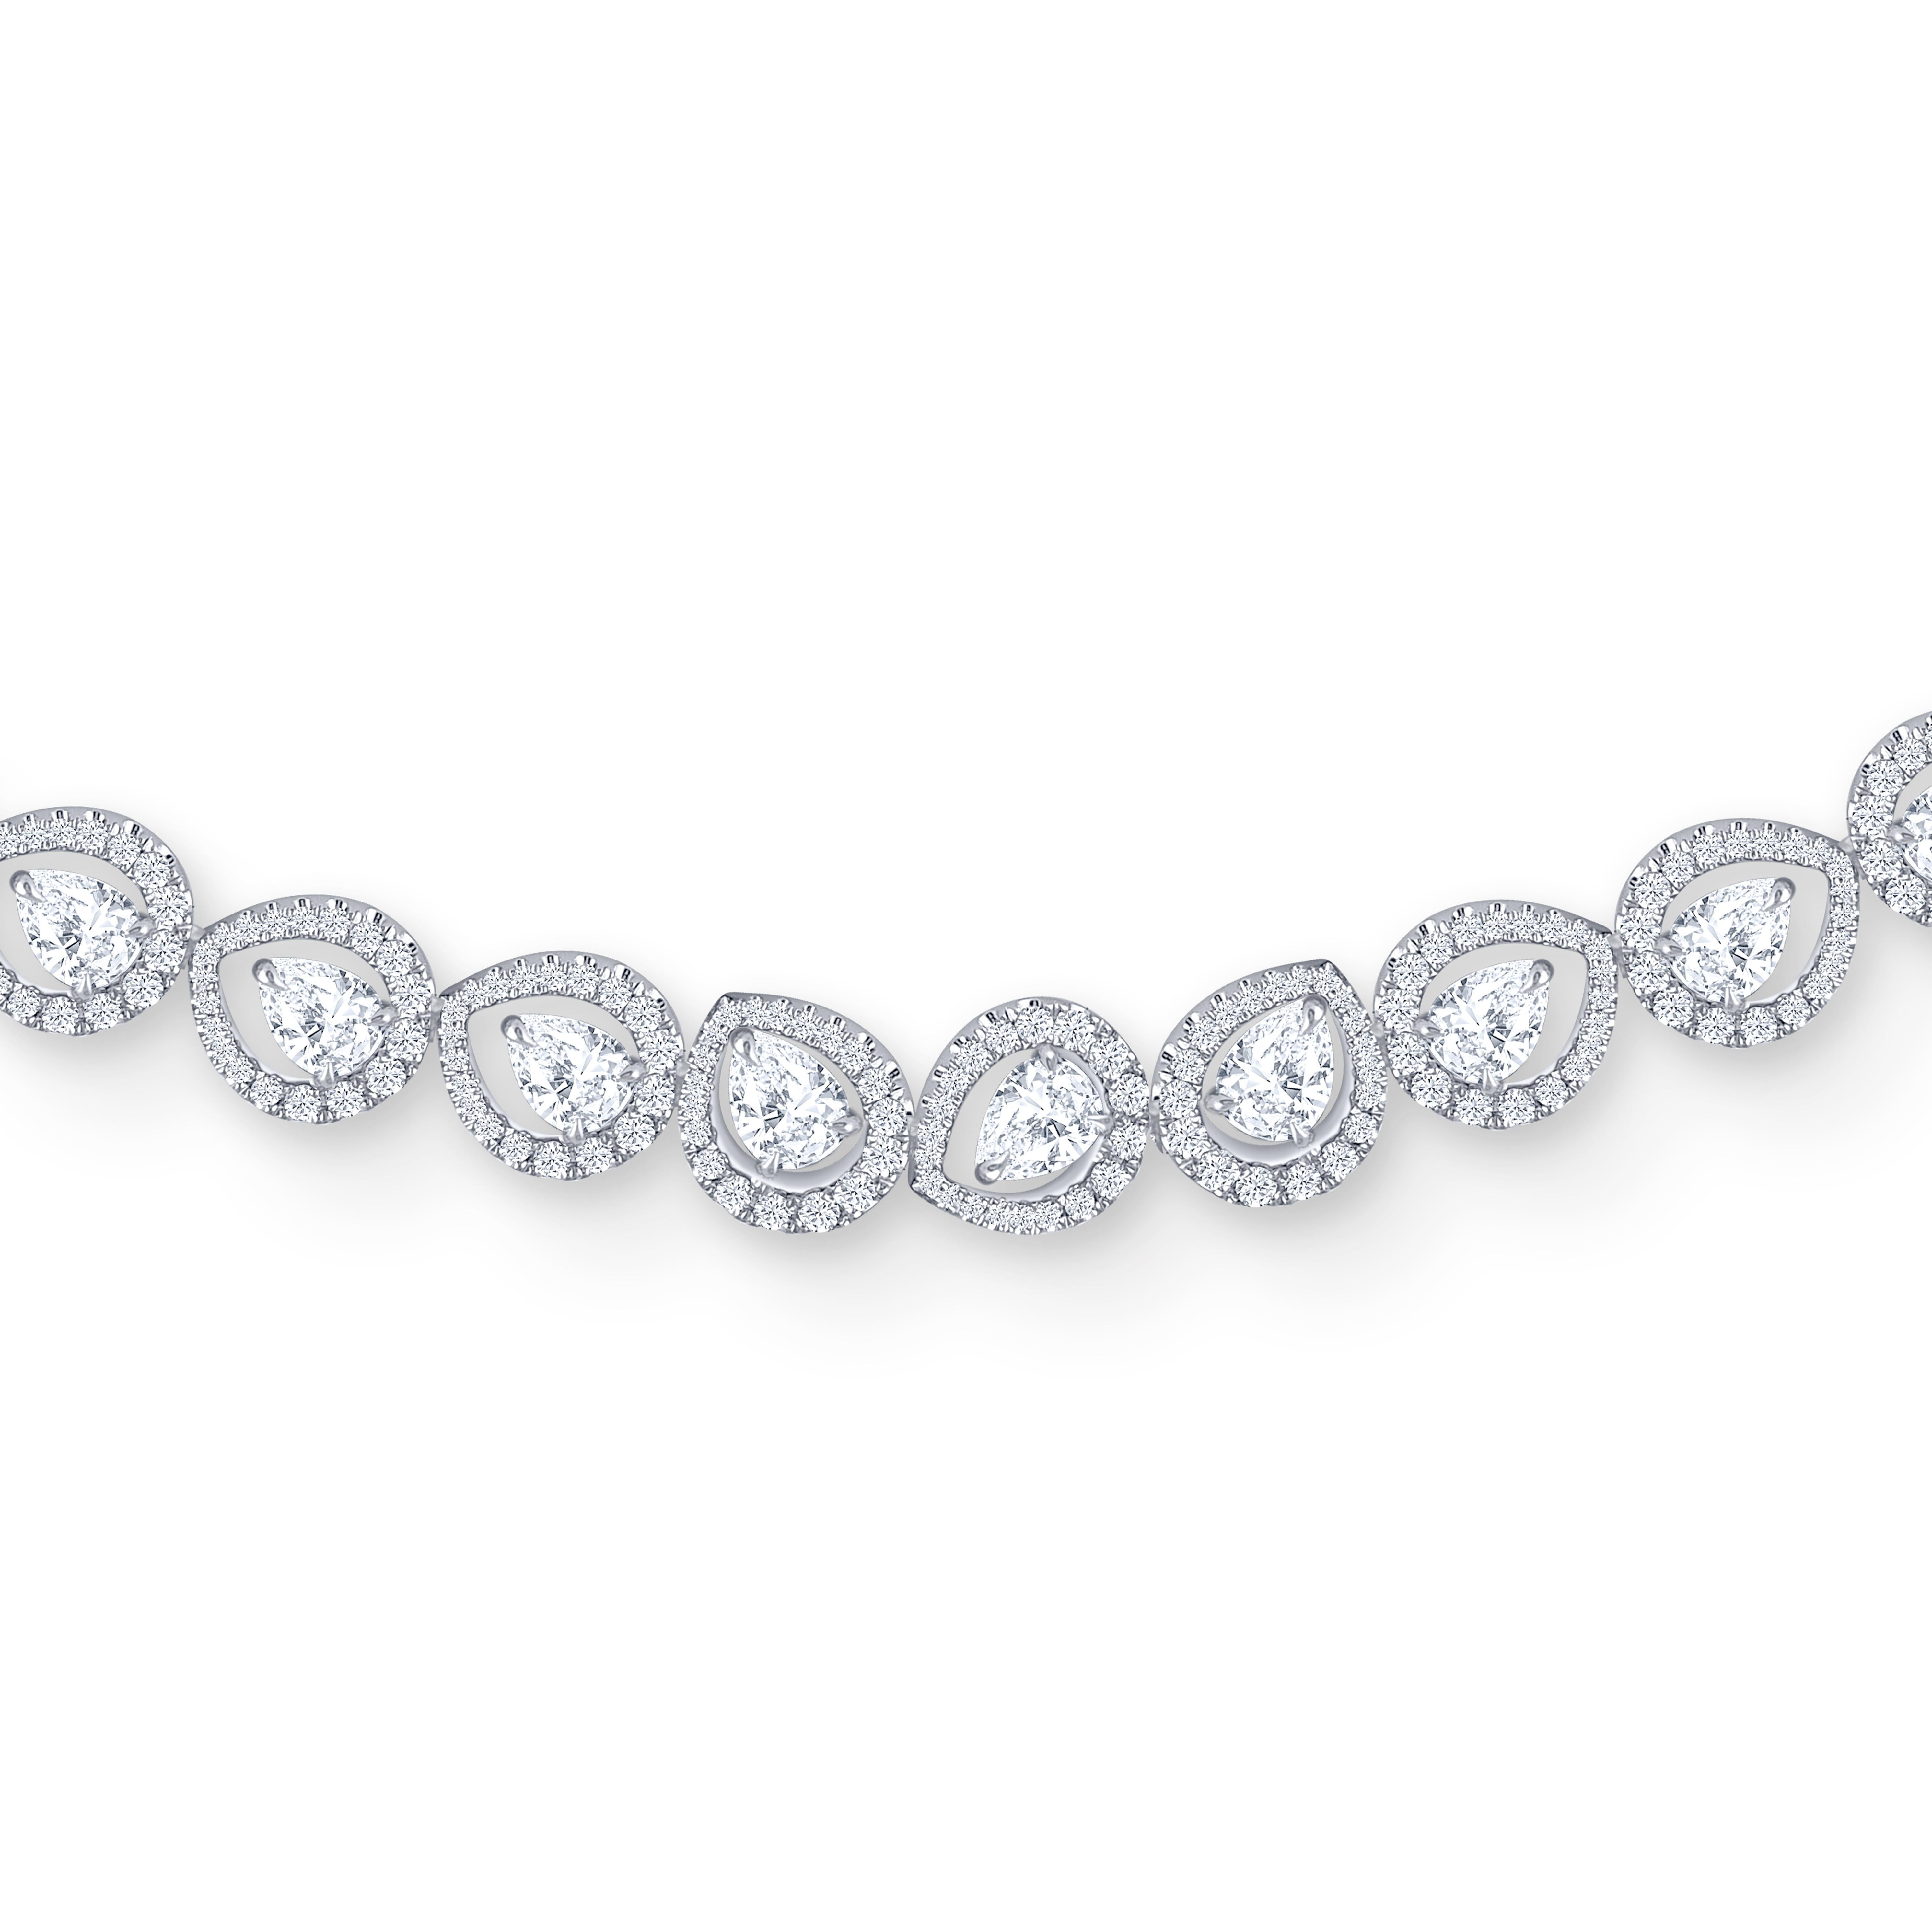 This handmade necklace is beautifully studded with a total 1066 D-F color and IF clarity natural diamonds. 1008 round and and 58 pear diamonds. This piece will be accompanied by a HARAKH certificate of authenticity and a Reflection card.

Each of